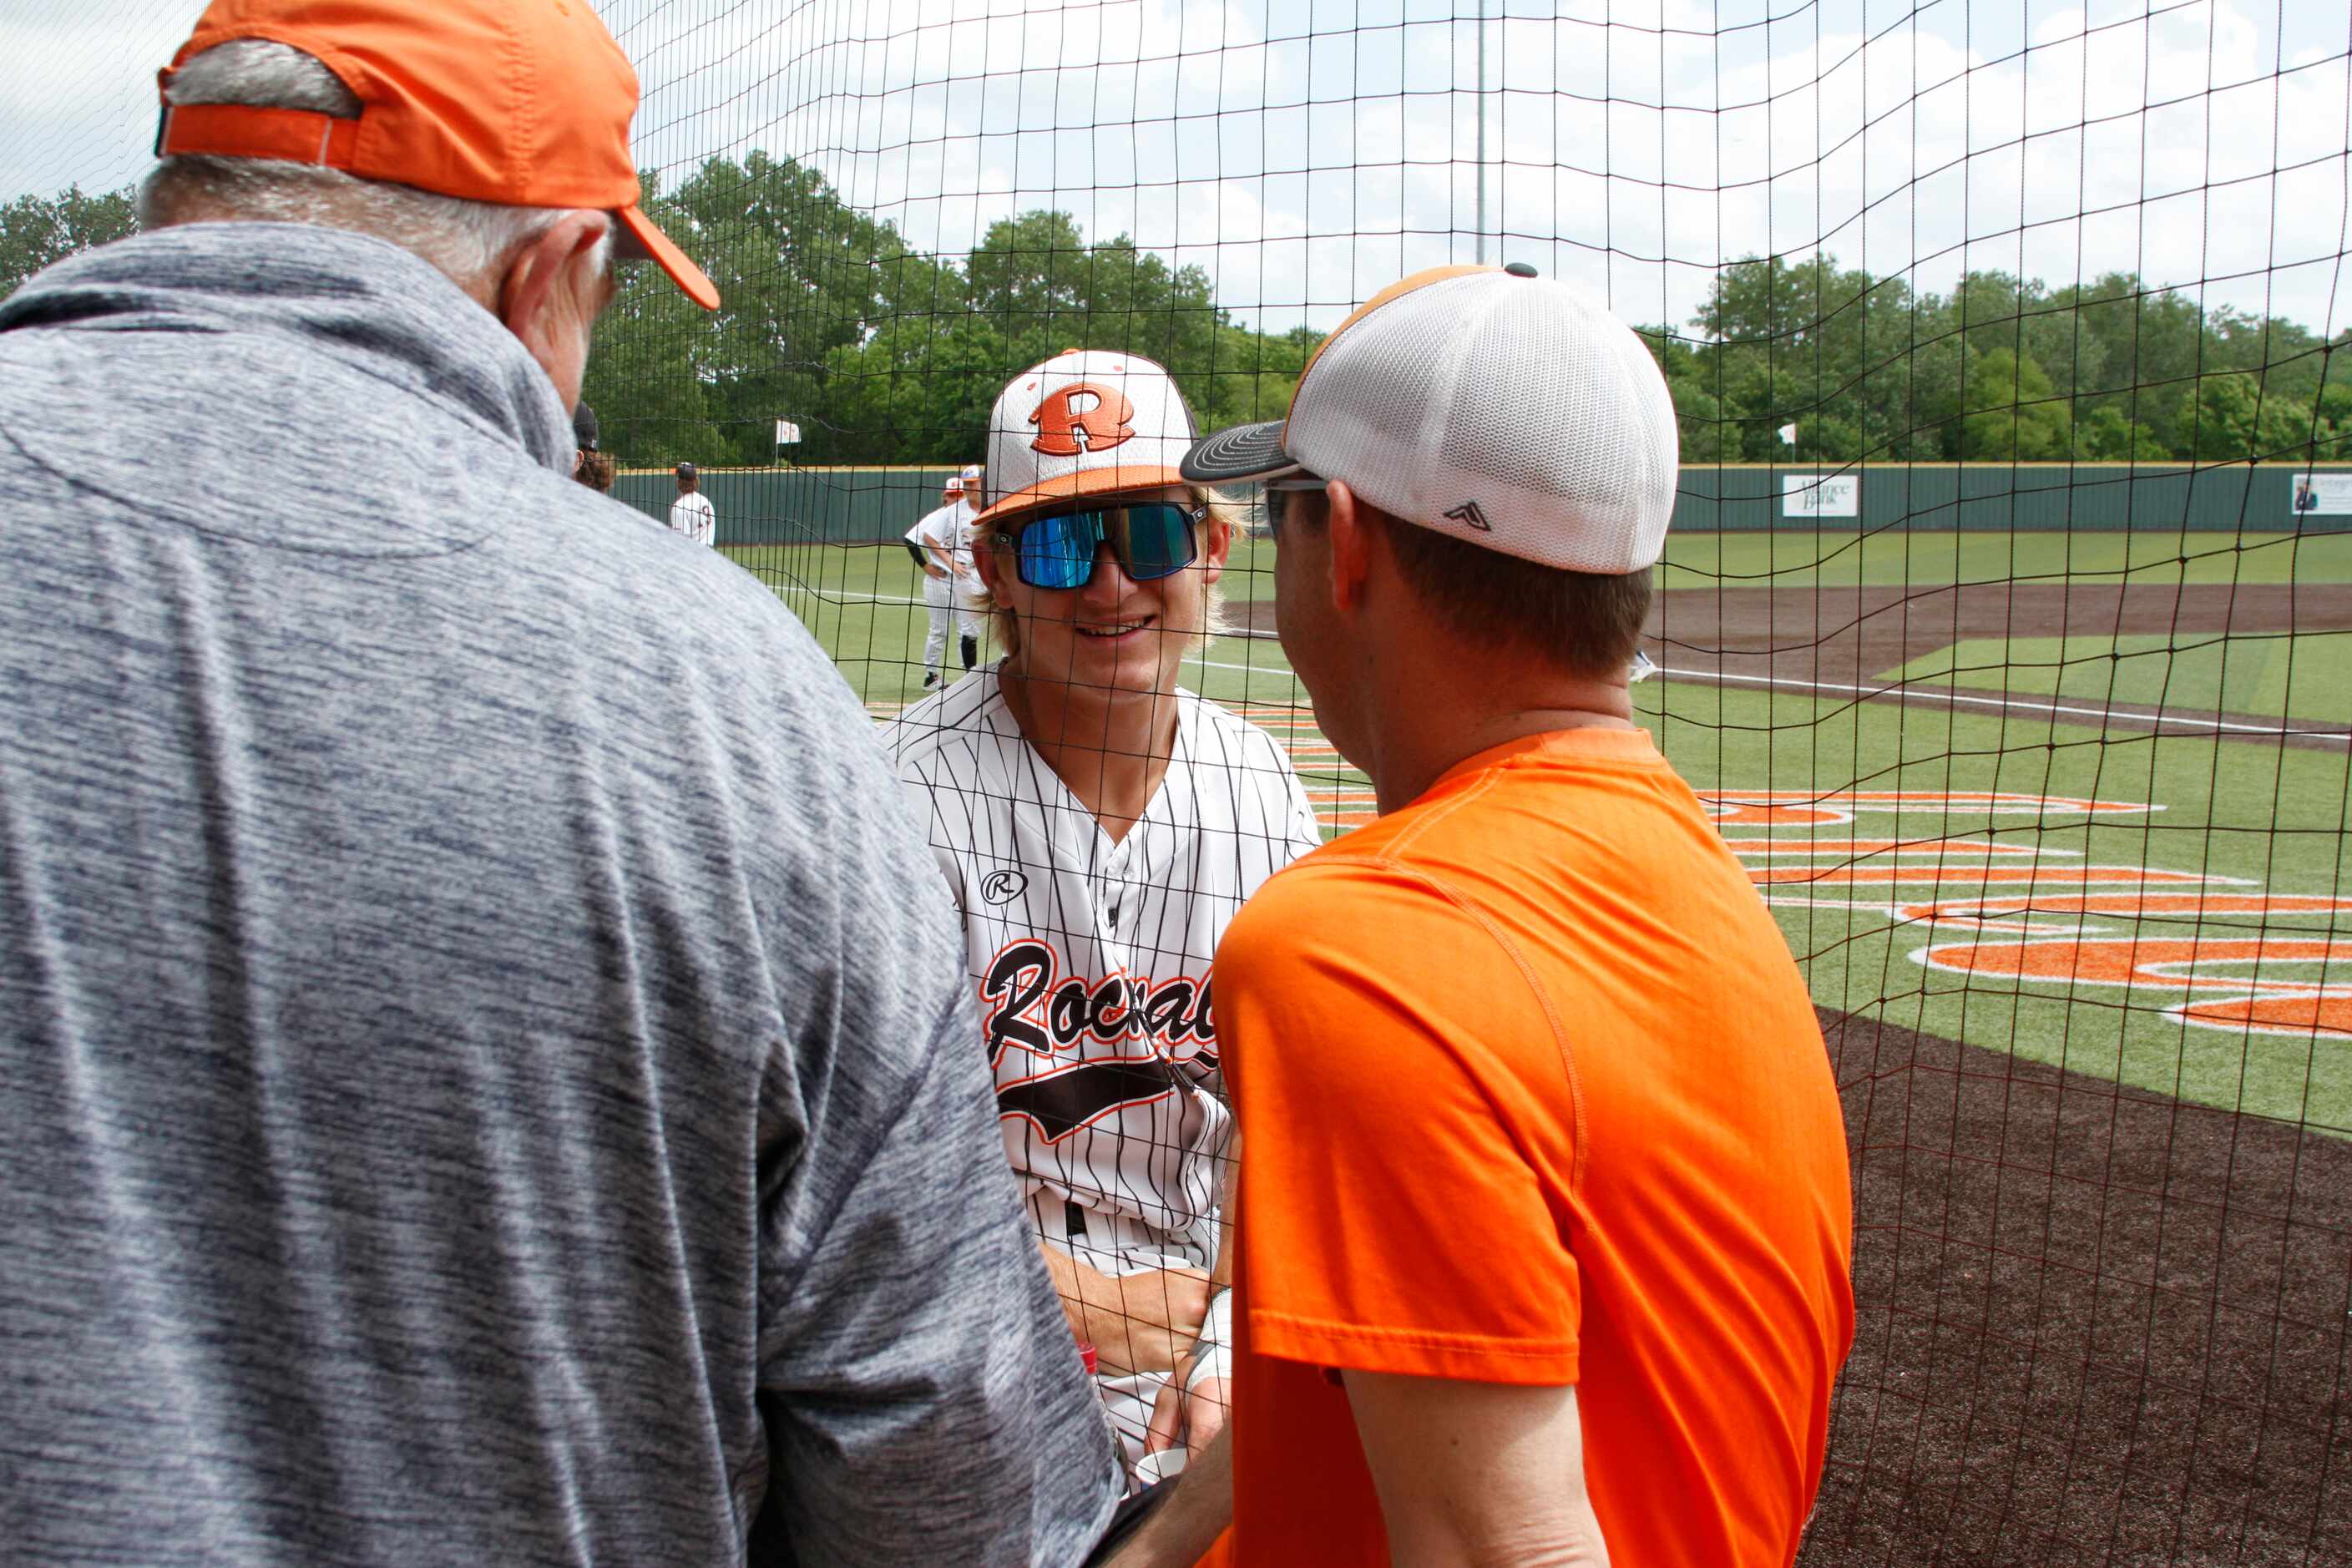 Rockwall shortstop Brayden Randle visits with fans before the start of their game against...